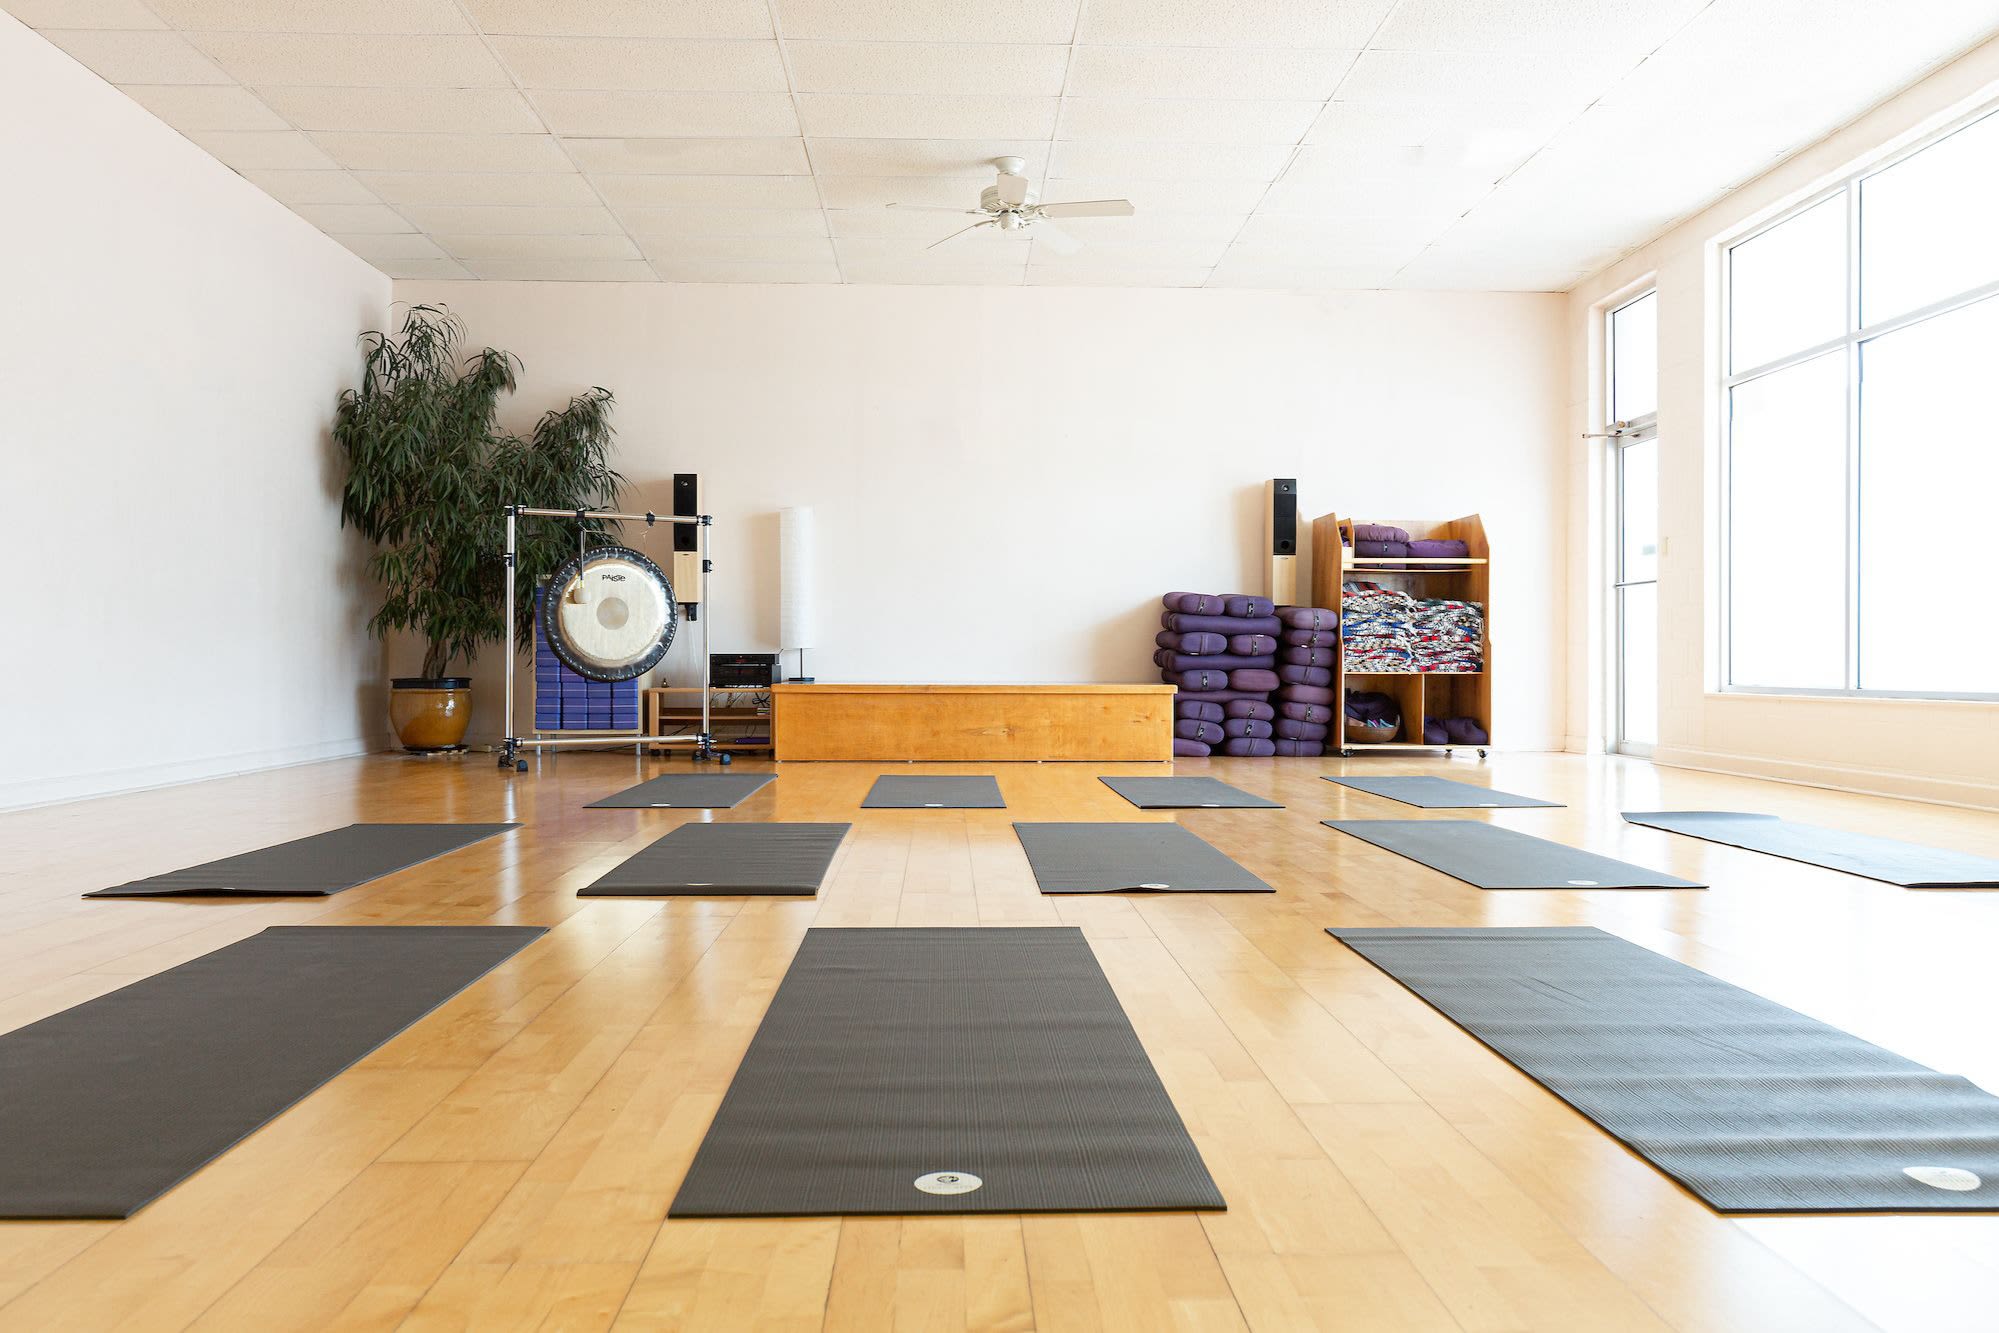 Flow Yoga Studio: Read Reviews and Book Classes on ClassPass